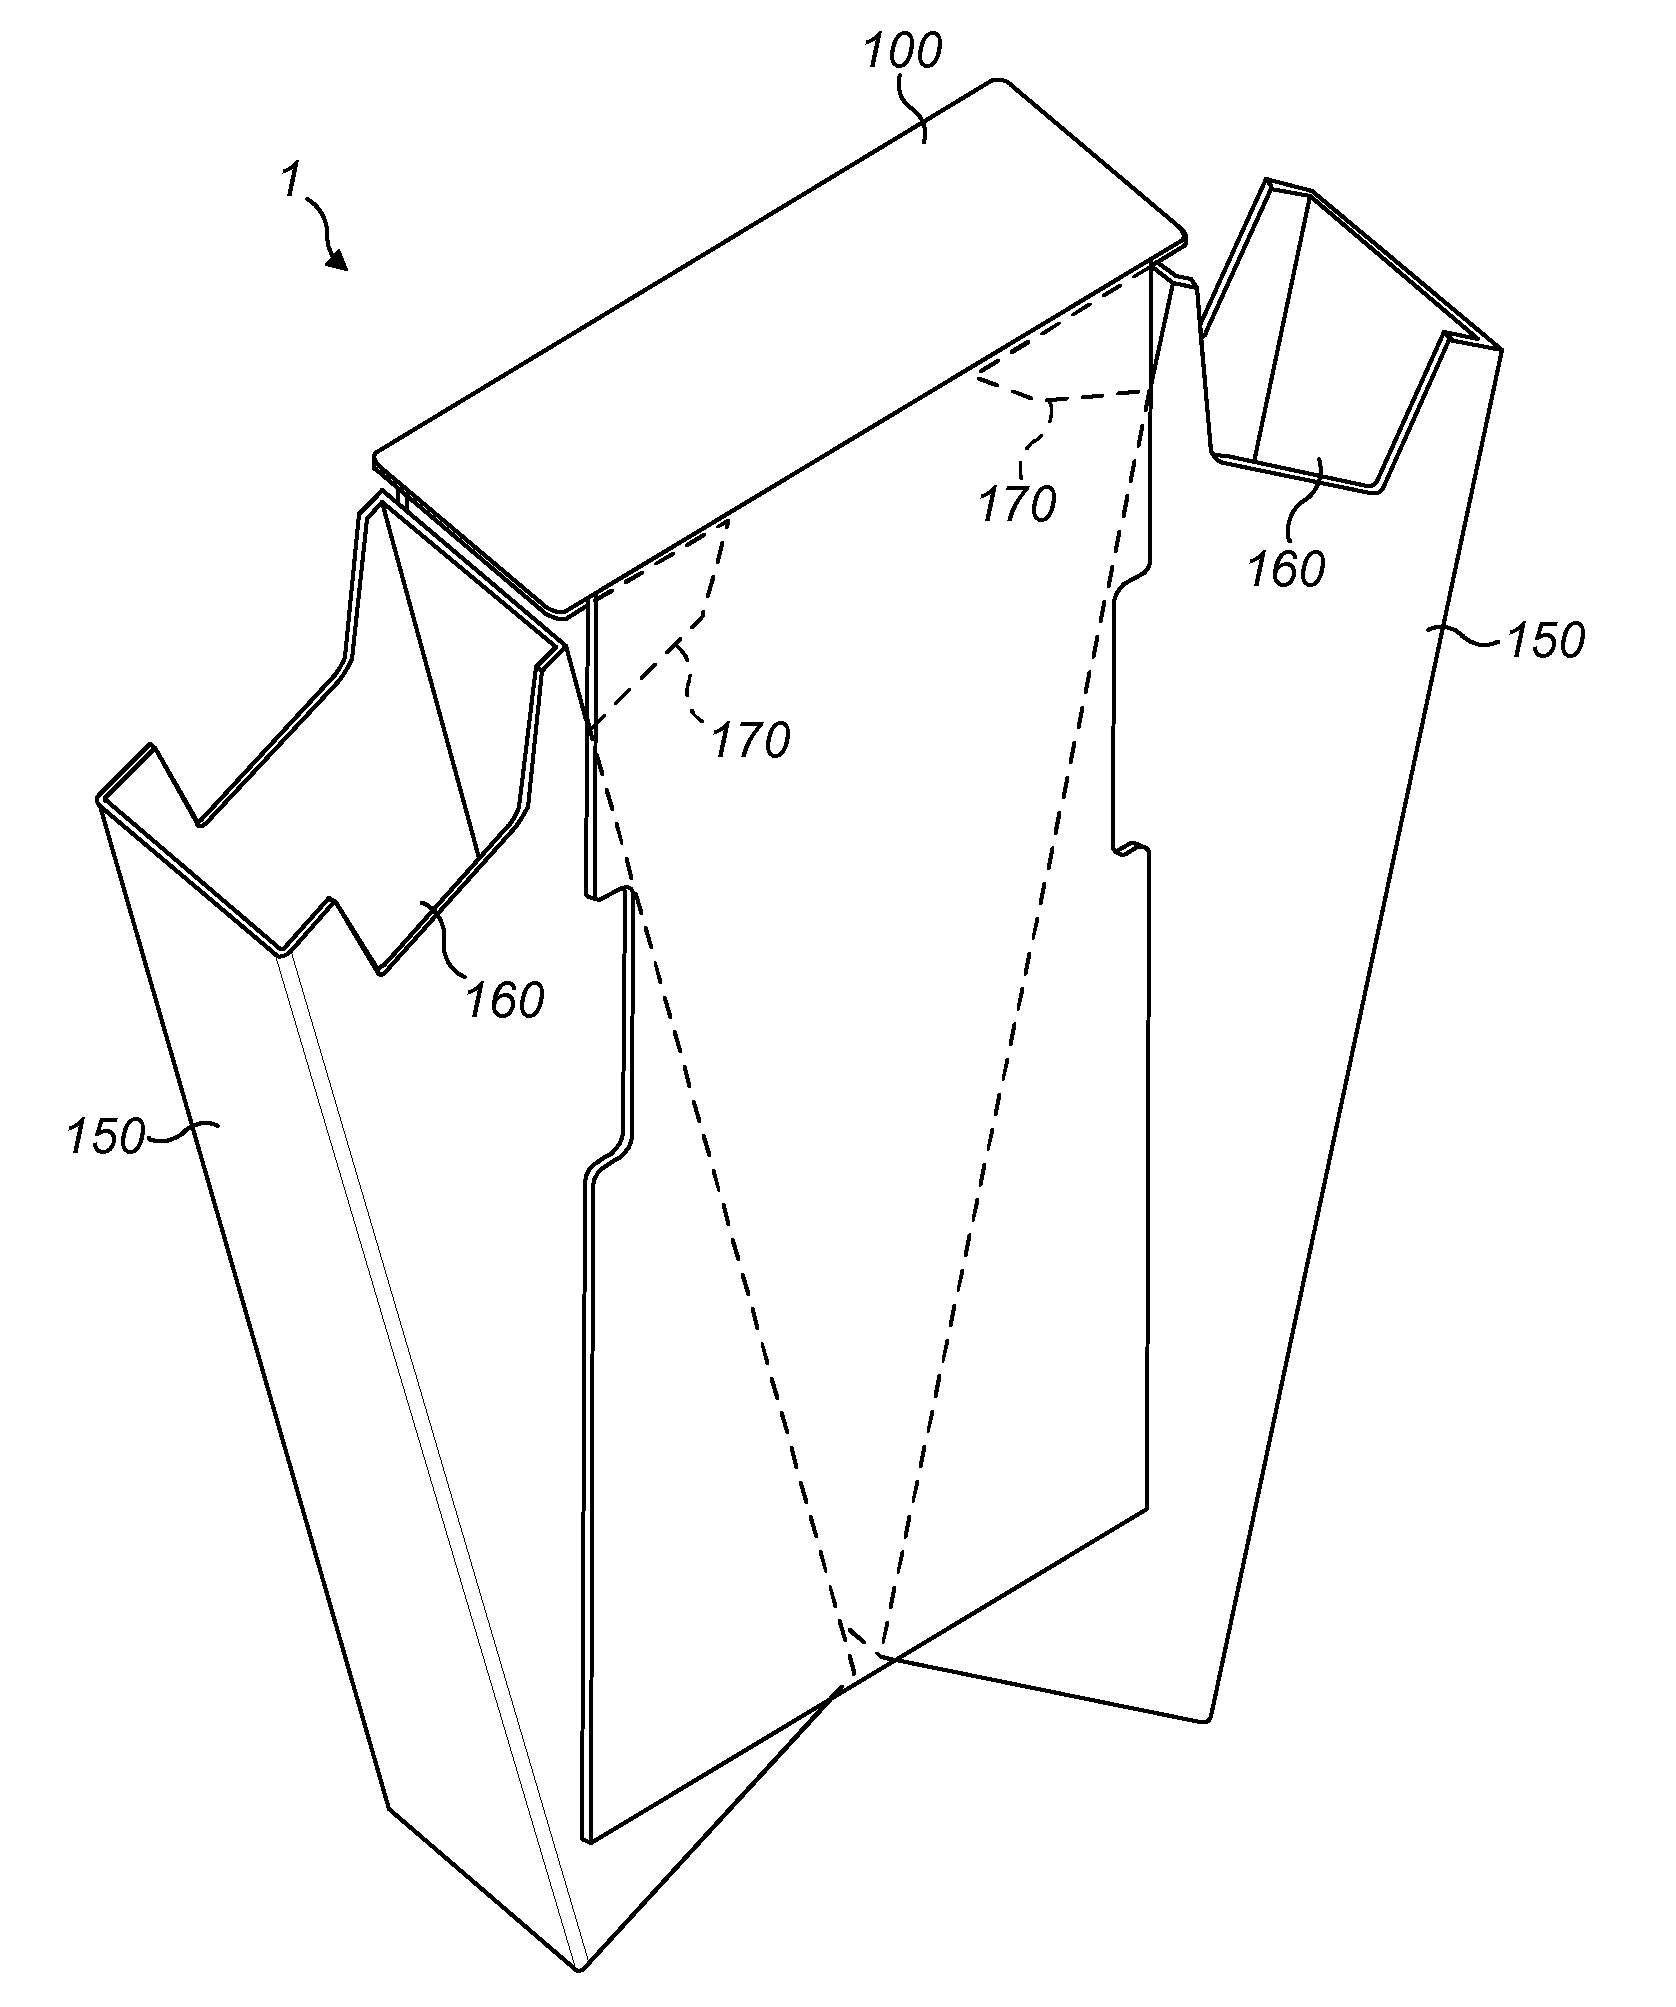 Packaging having a movable inner packet part